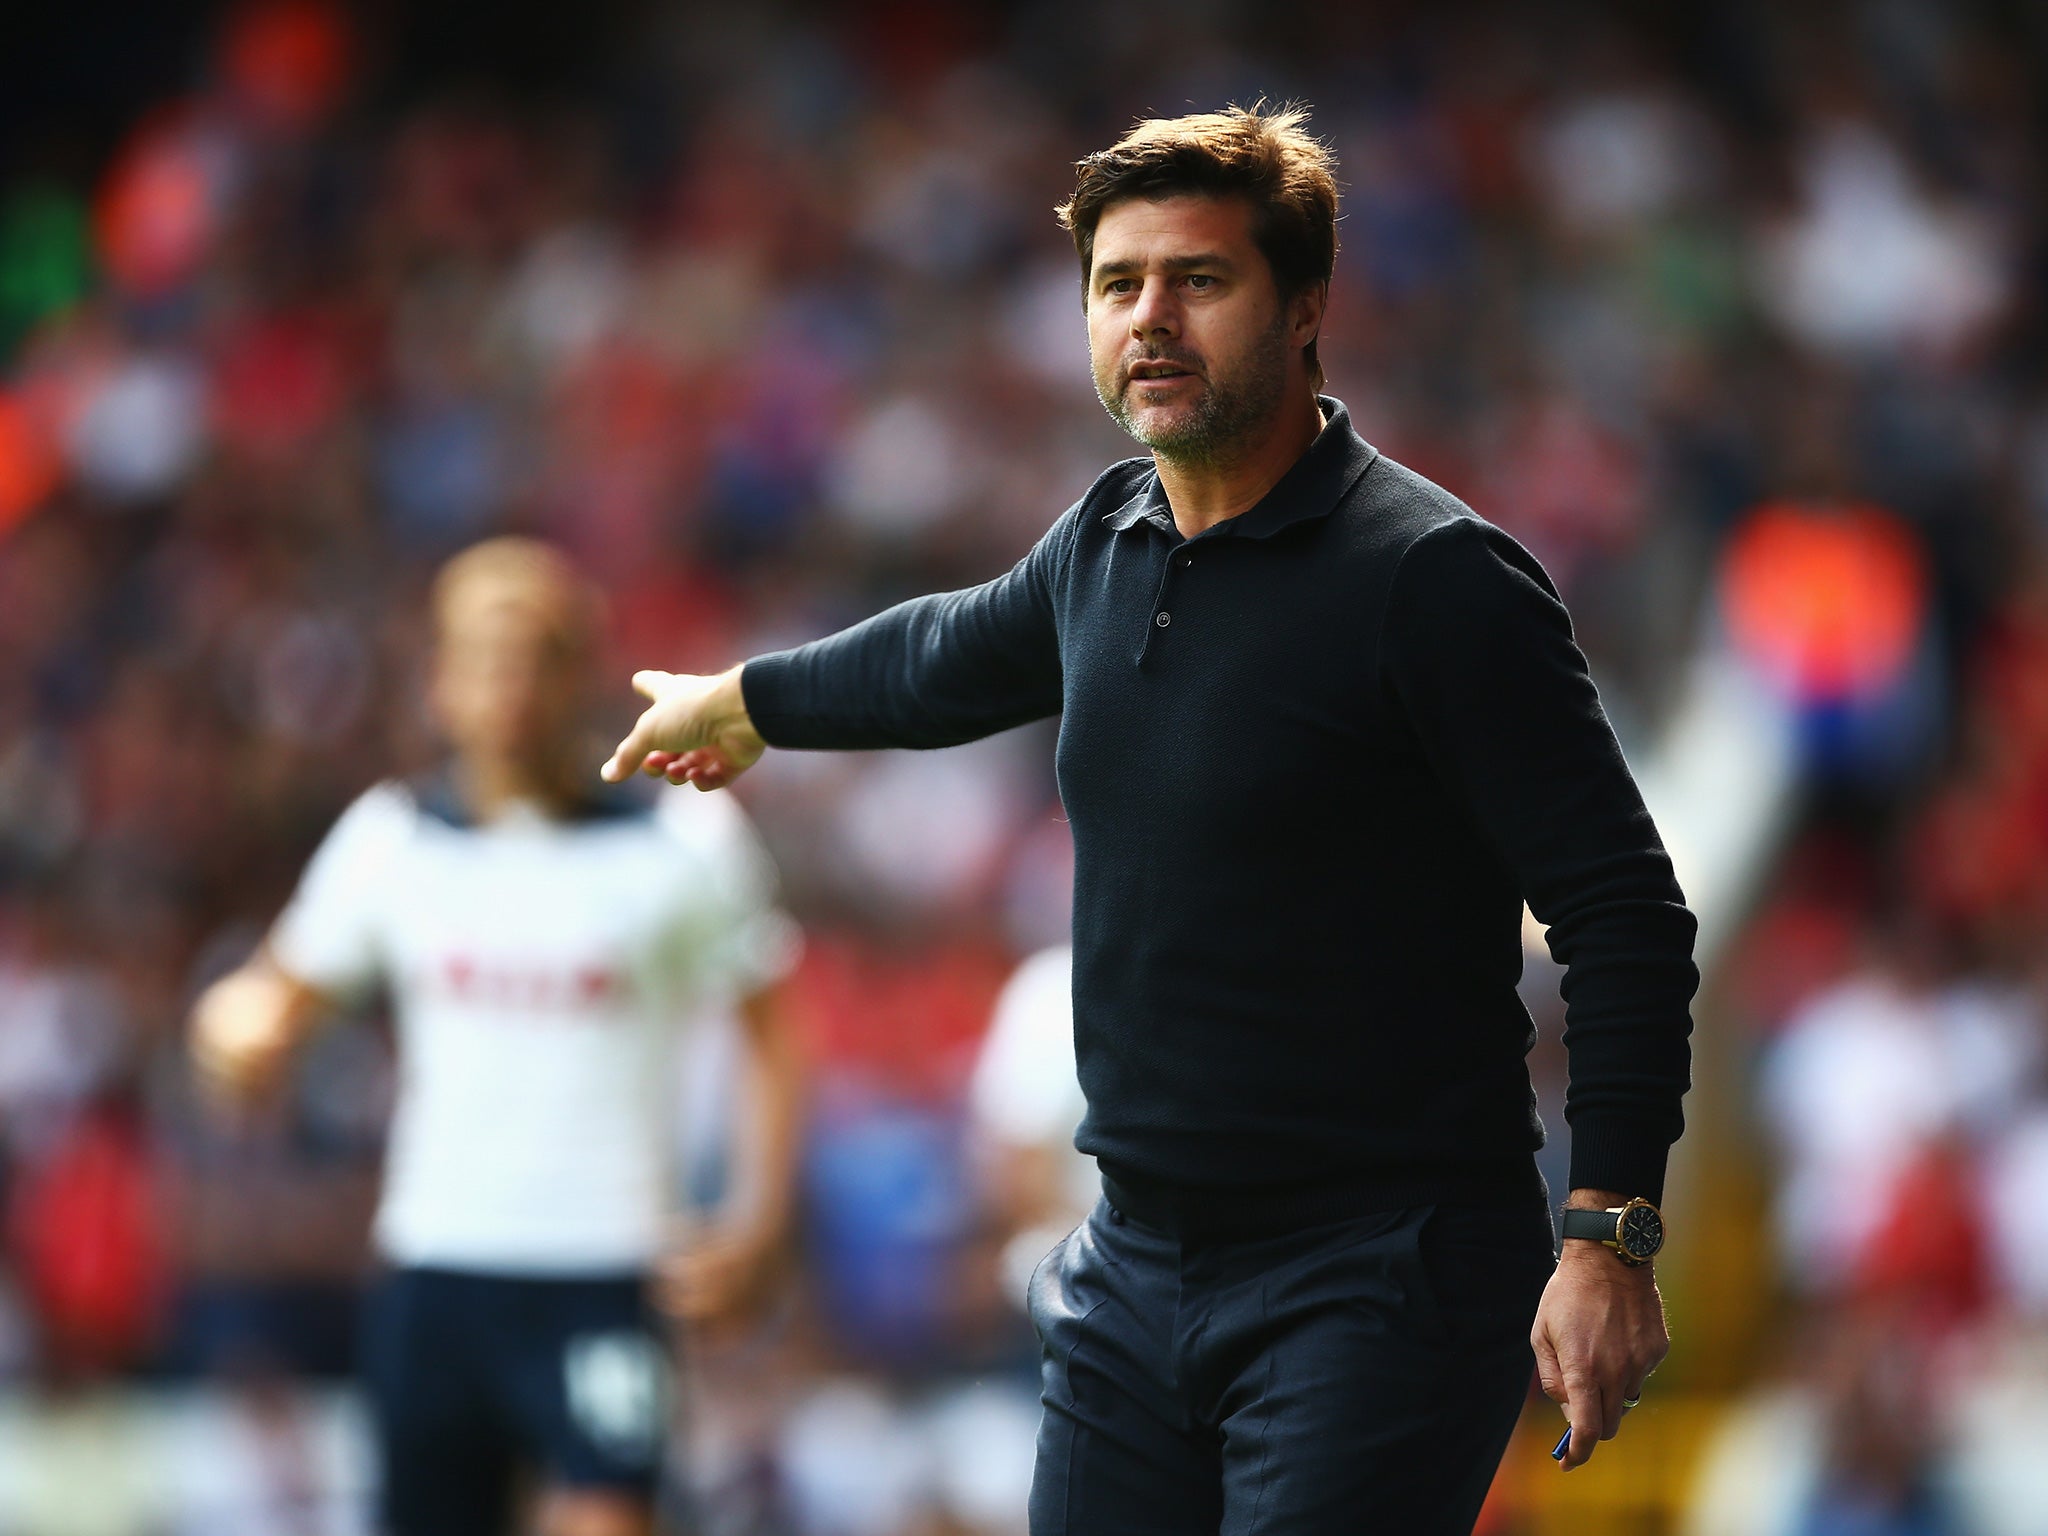 Pochettino was pleased with his side's second-half showing